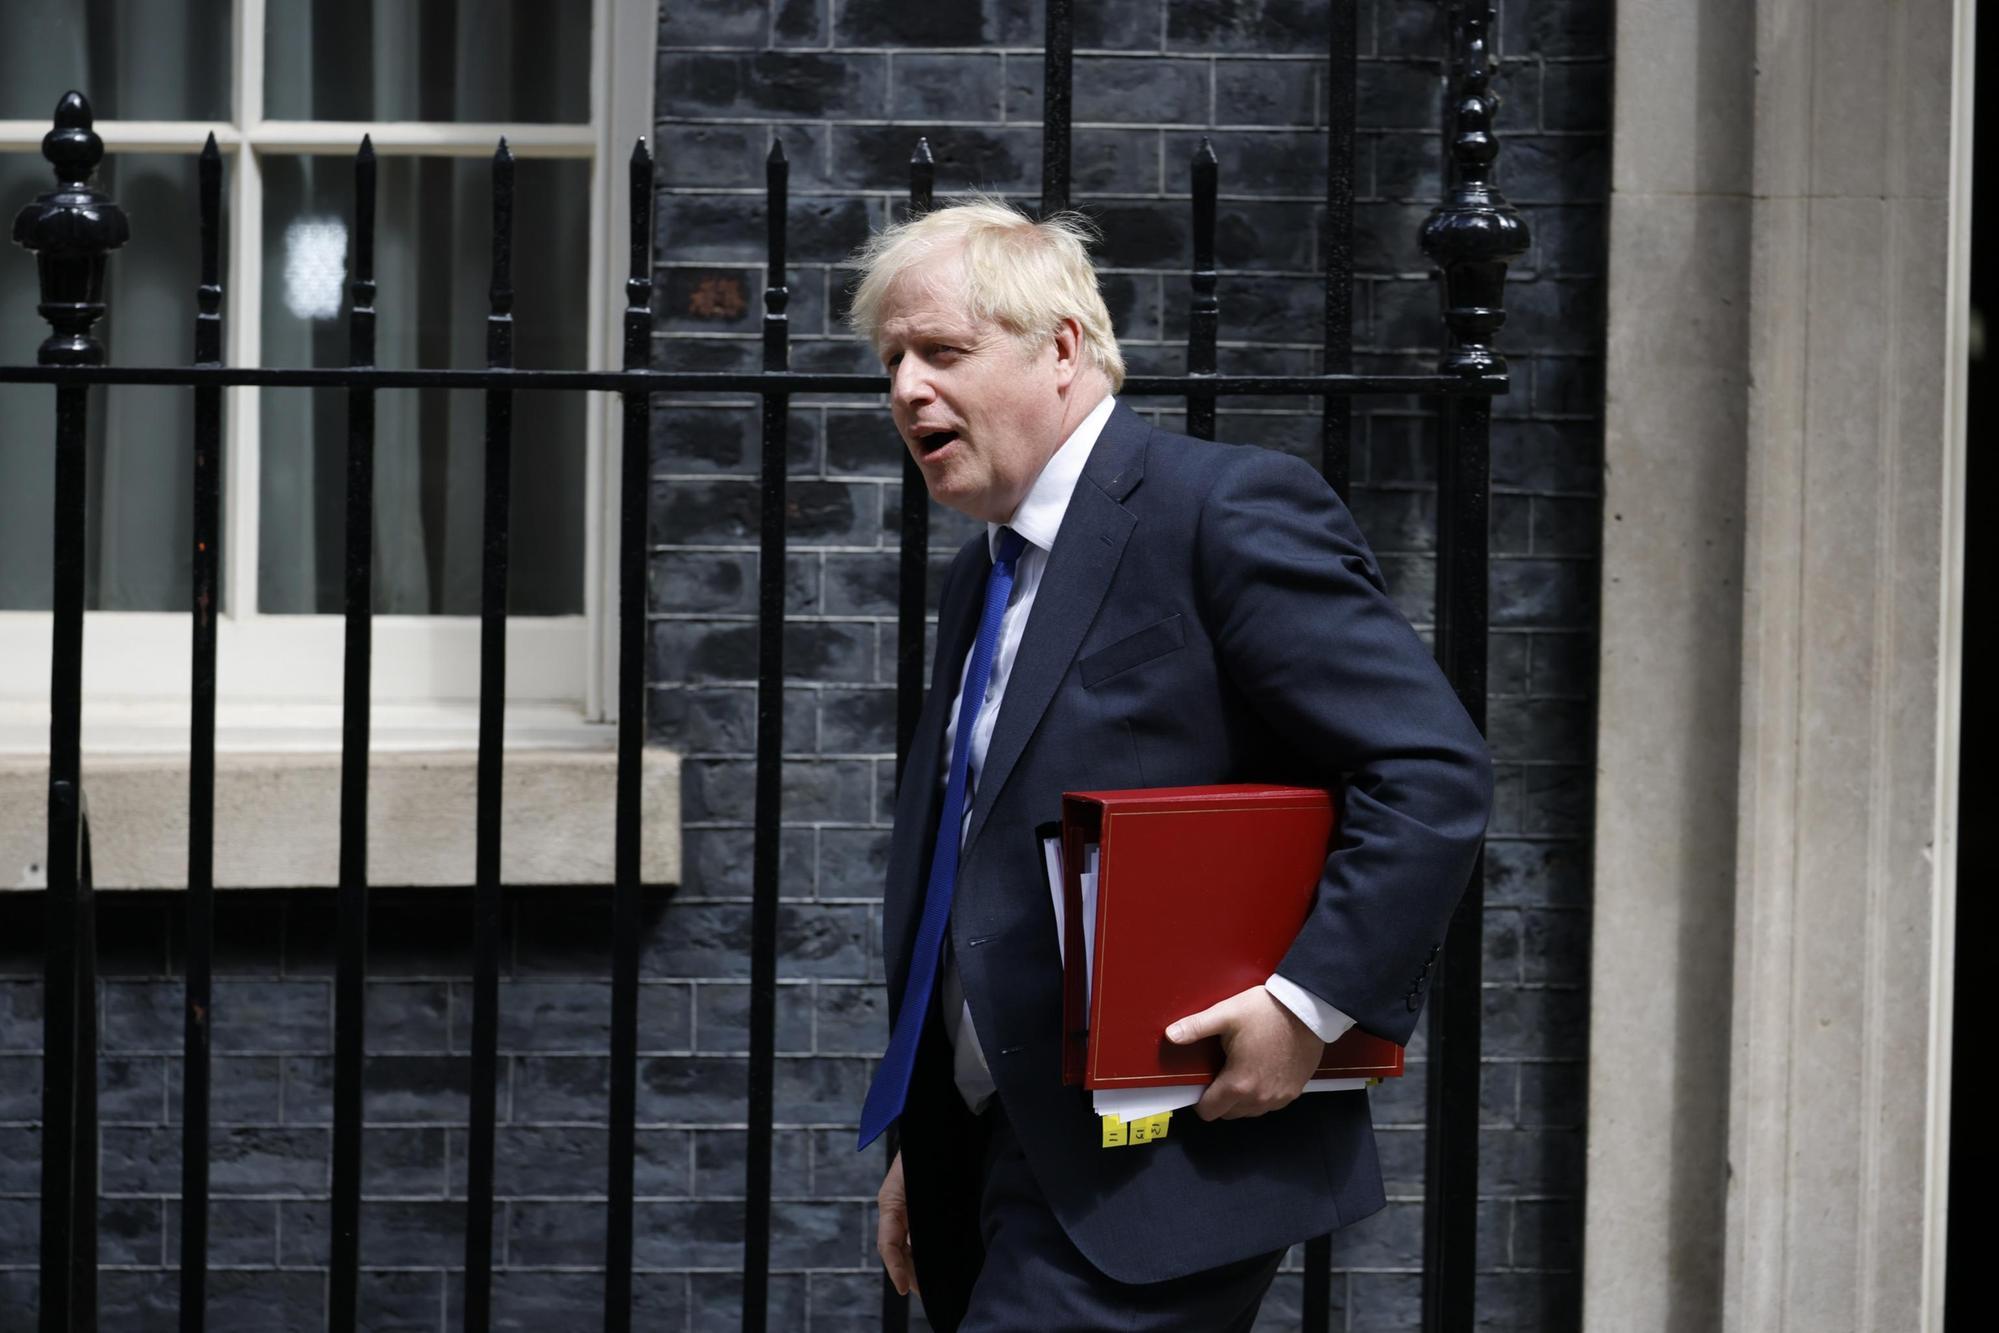 Burst resignation in the Johnson government. But he doesn't give up: &quot;No early elections&quot;